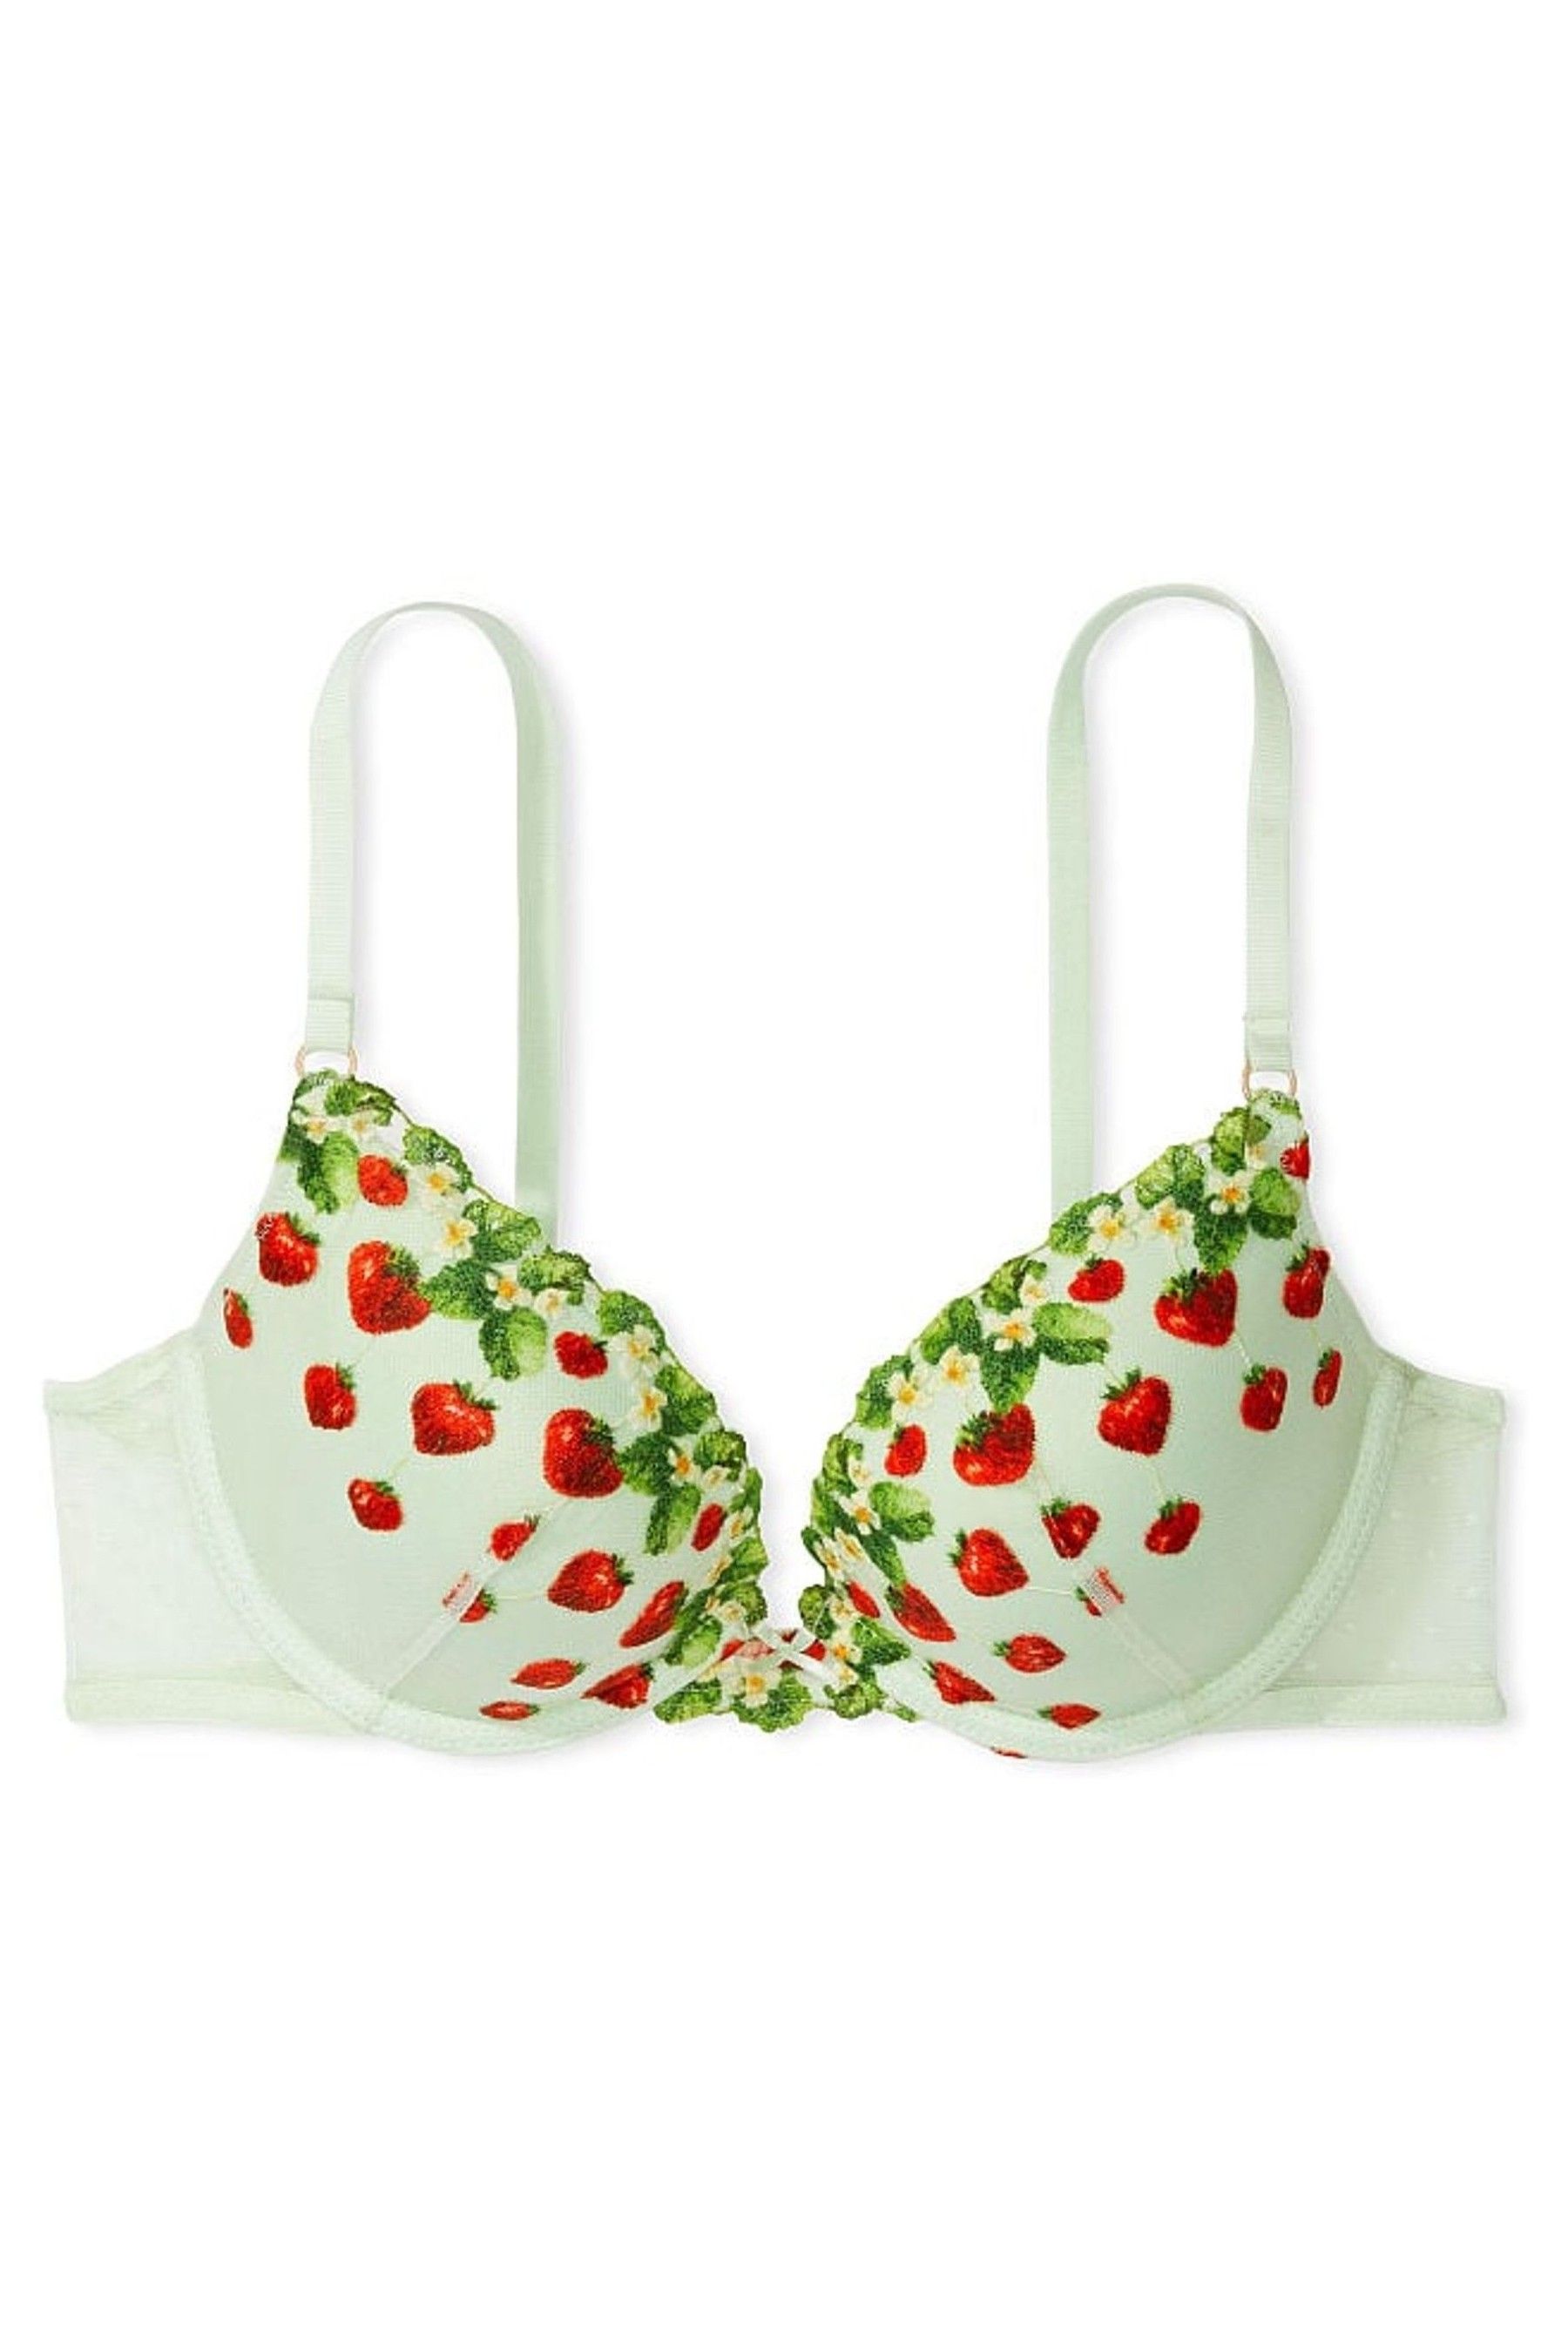 Buy Victoria's Secret Dream Angels Plunge Push Up Bra from the Victoria ...